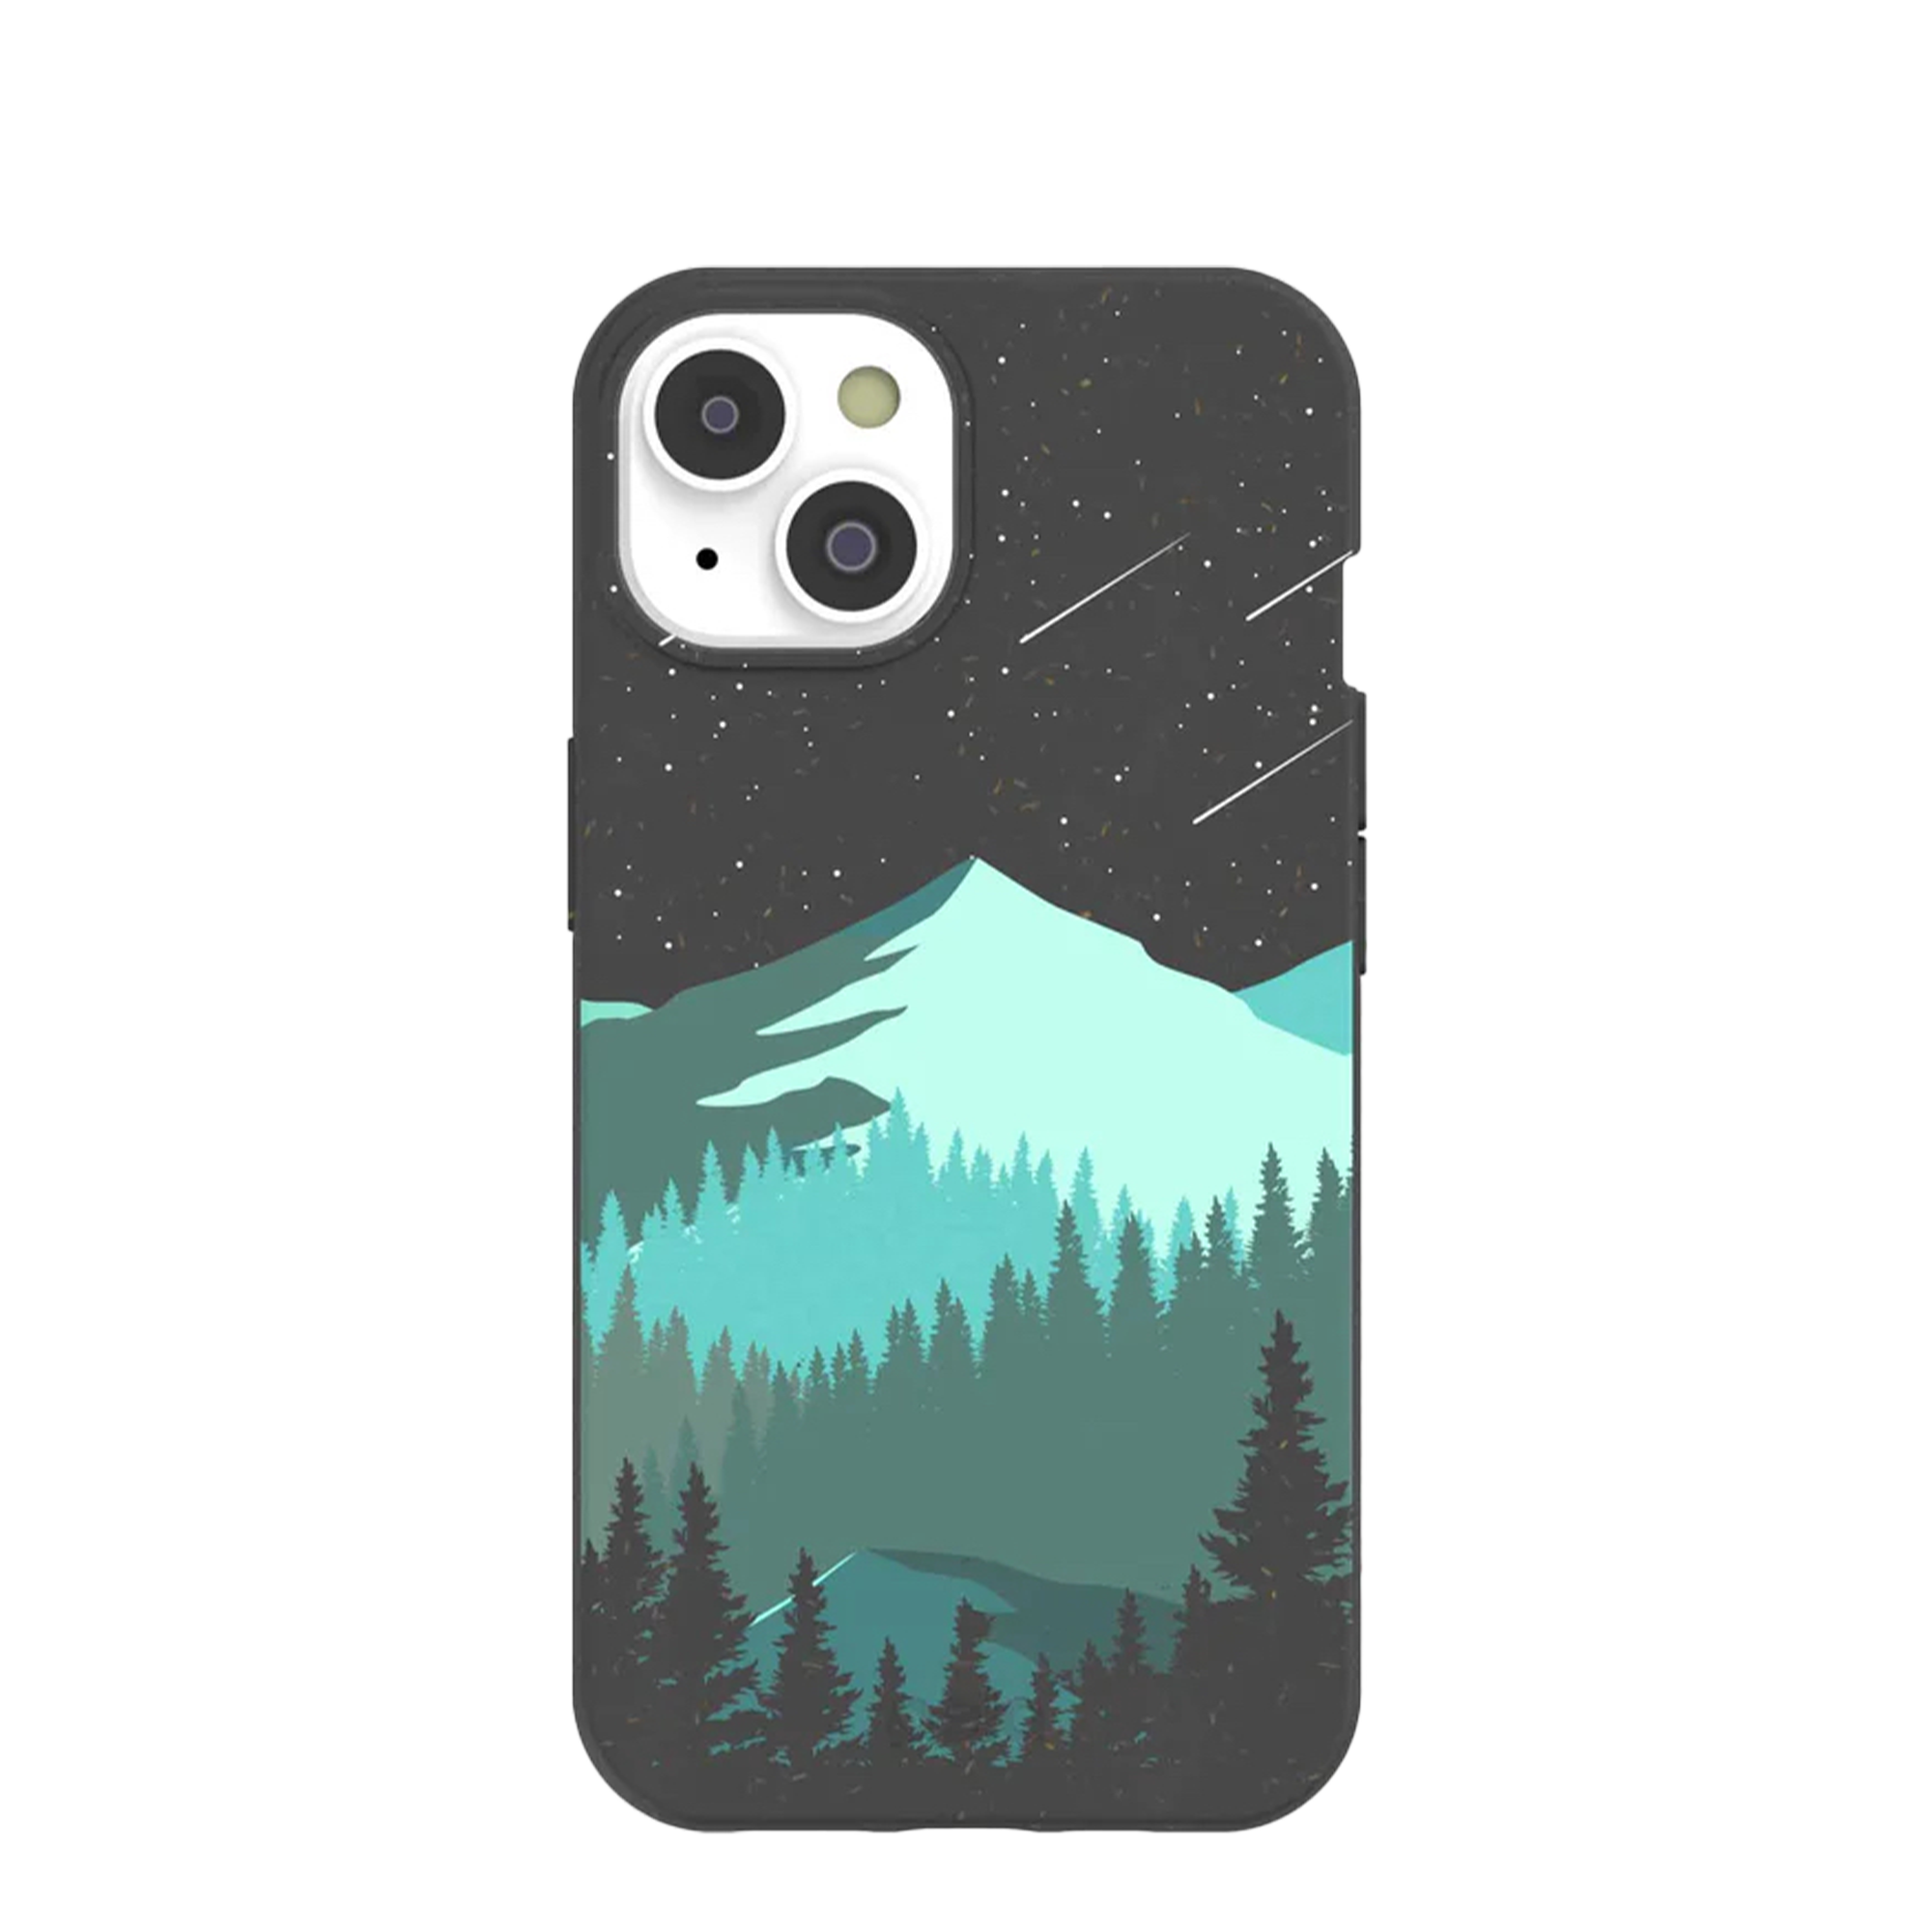 Phone case with a mountain and forest design under a starry sky.